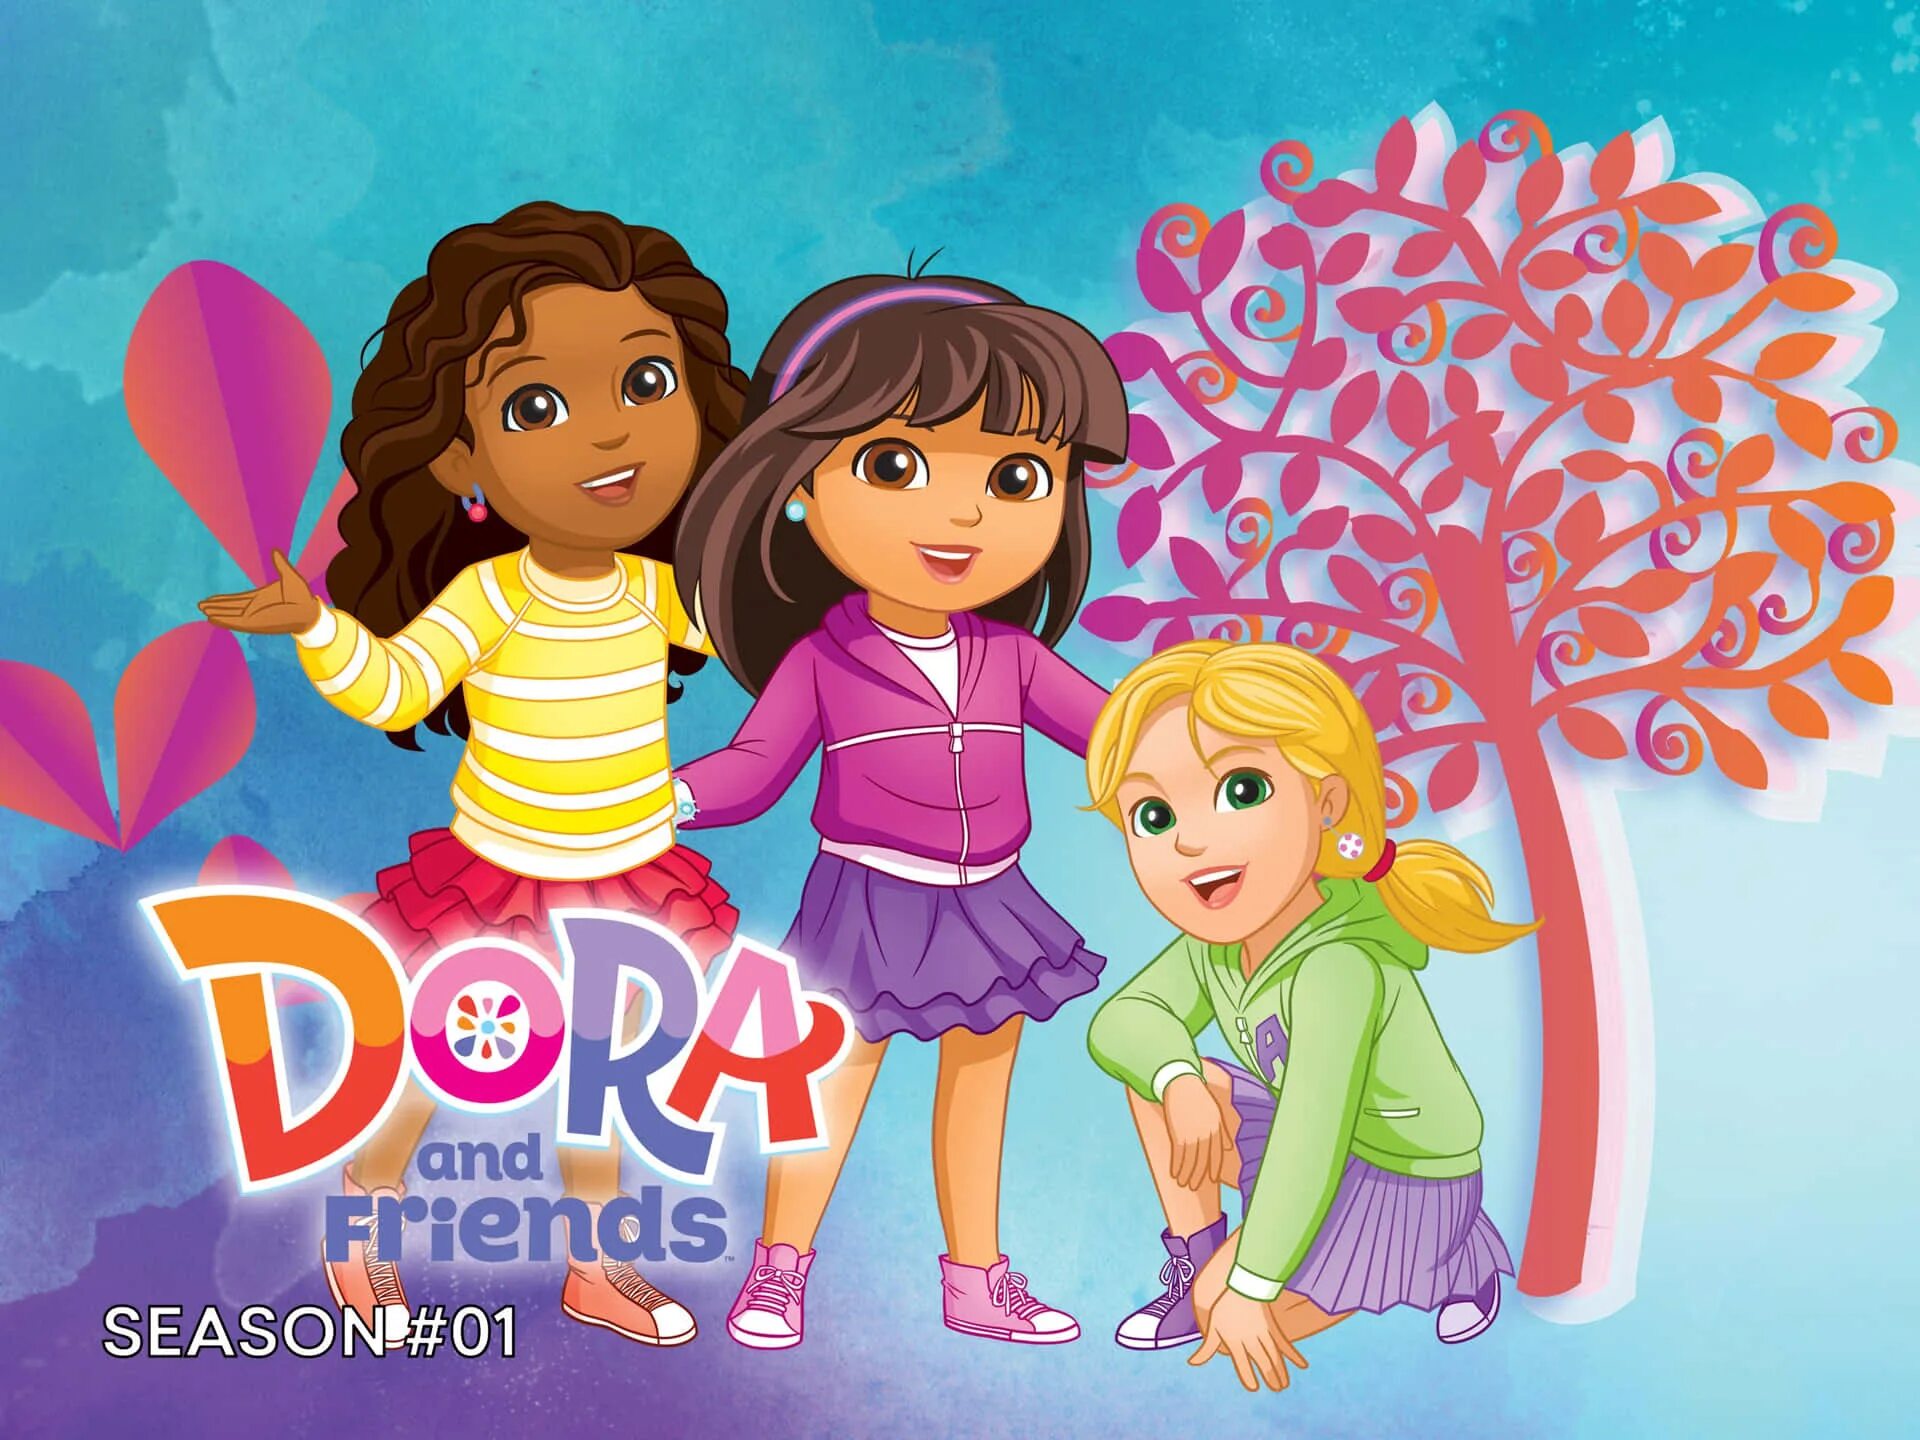 Dora and friends Кейт. Dora and friends into the City. Санни Дэй Dora and friends. Dora and friends into the City Alana. Ready my friend